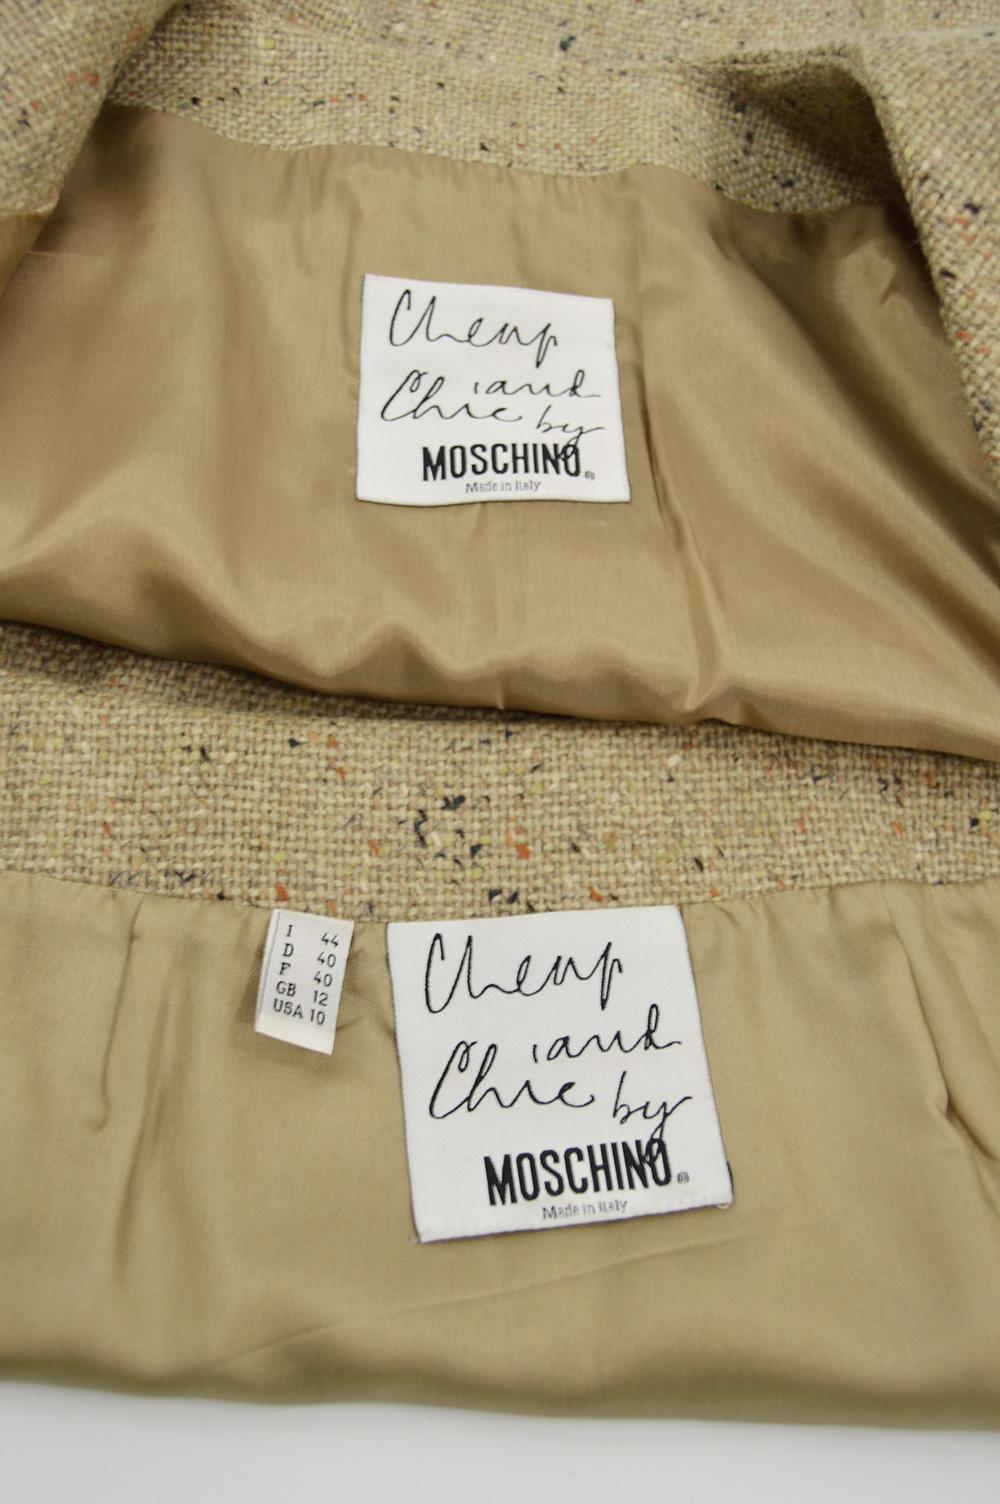 Moschino Vintage Wool Tweed 2 Piece Jacket & Skirt Suit with Heart Button, 1990s For Sale 4